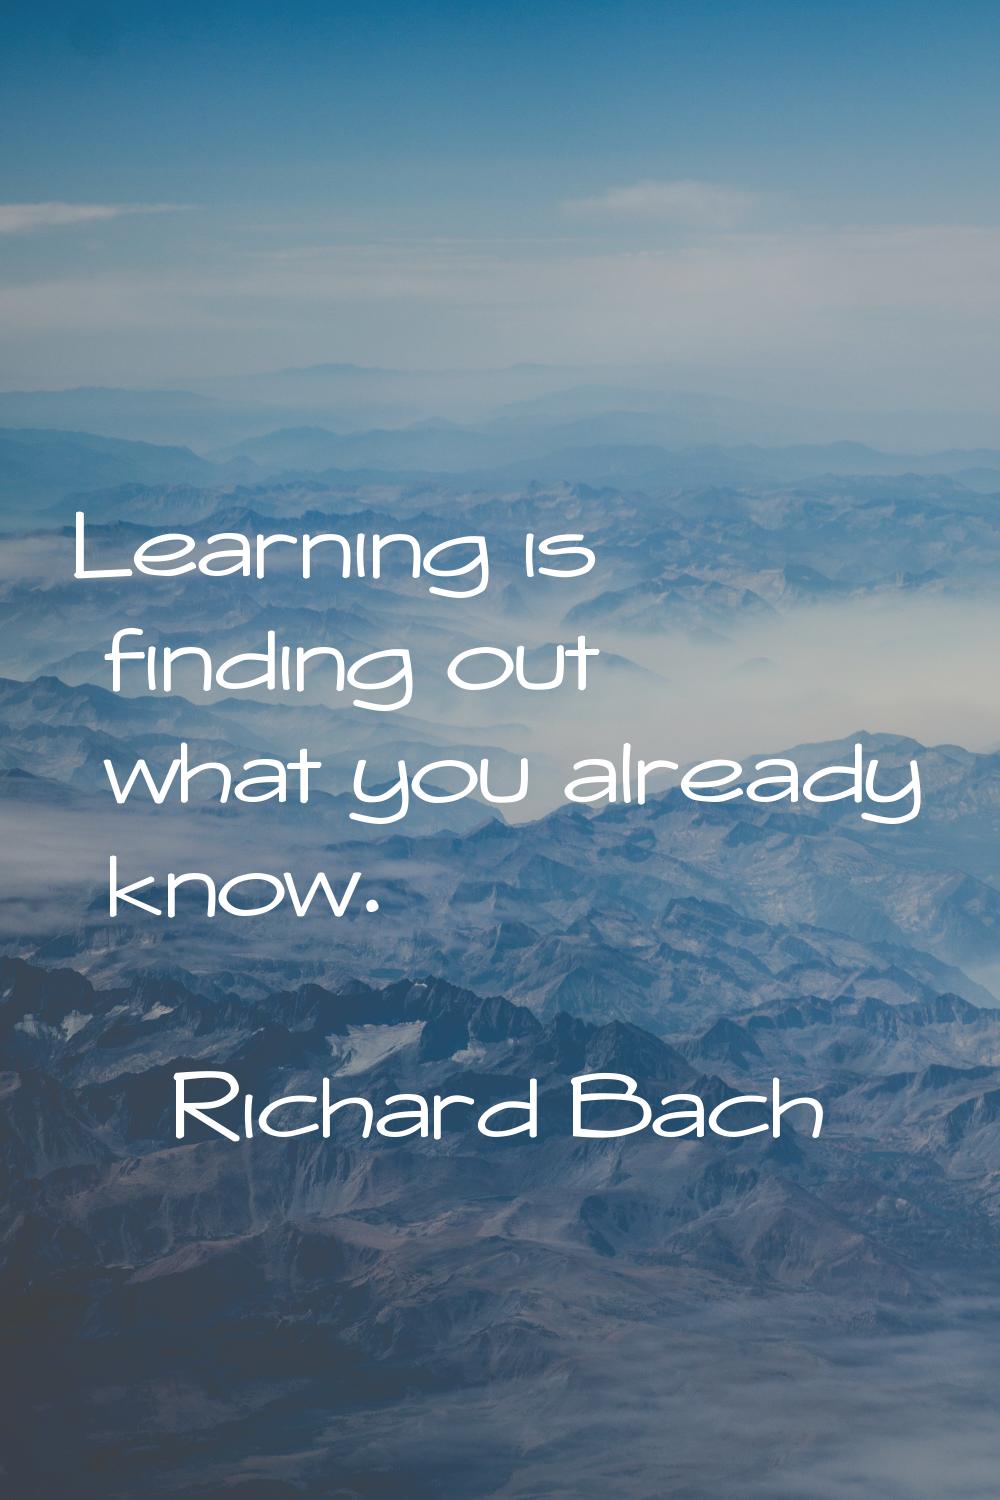 Learning is finding out what you already know.